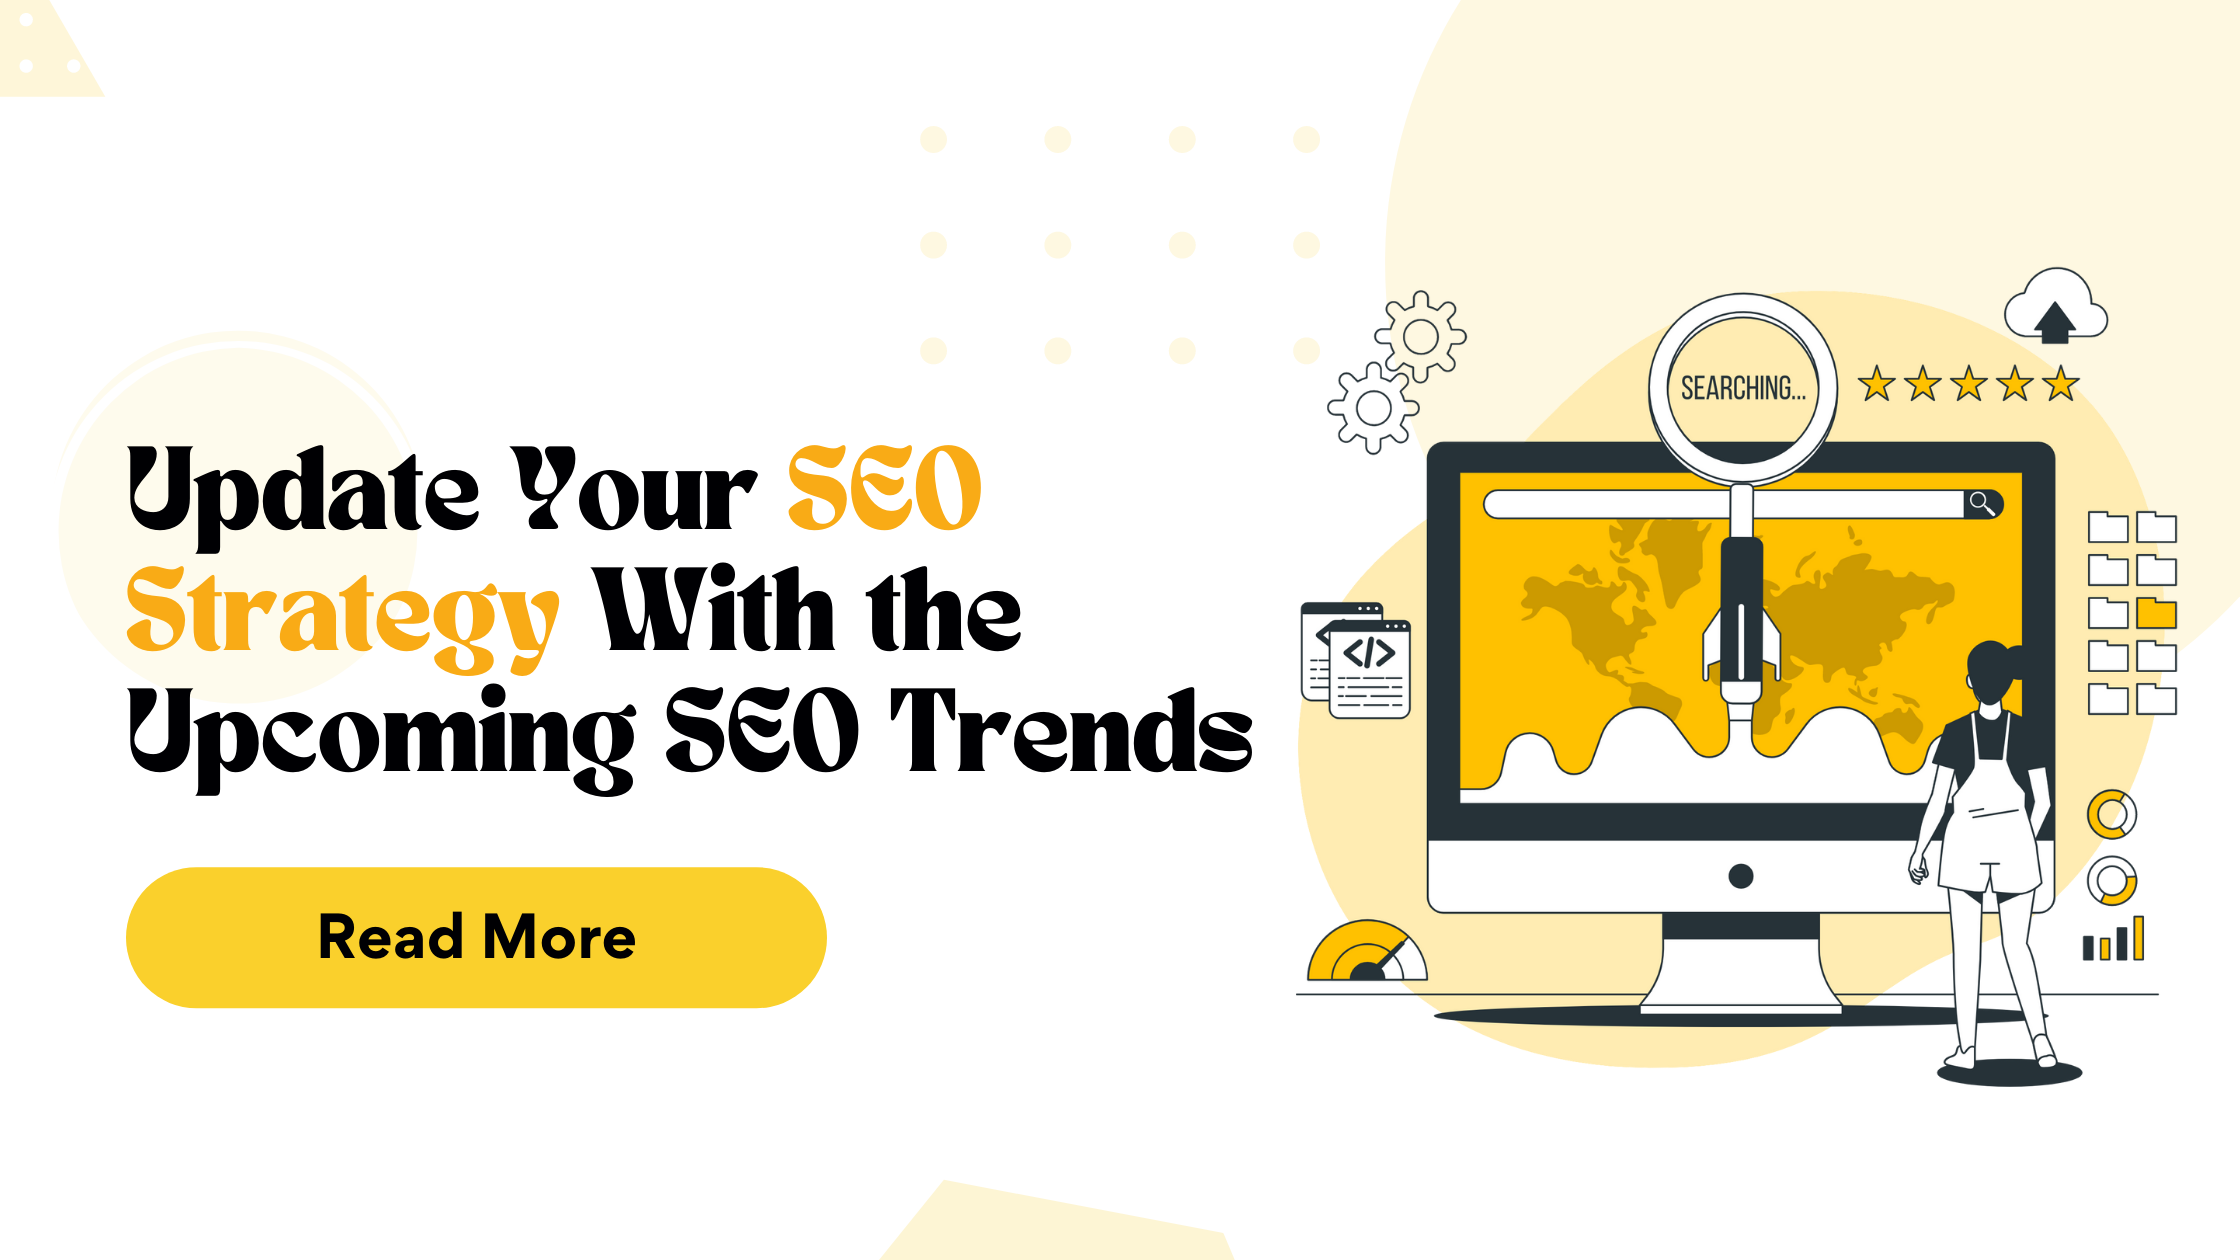 Update Your SEO Strategy With the Upcoming SEO Trends